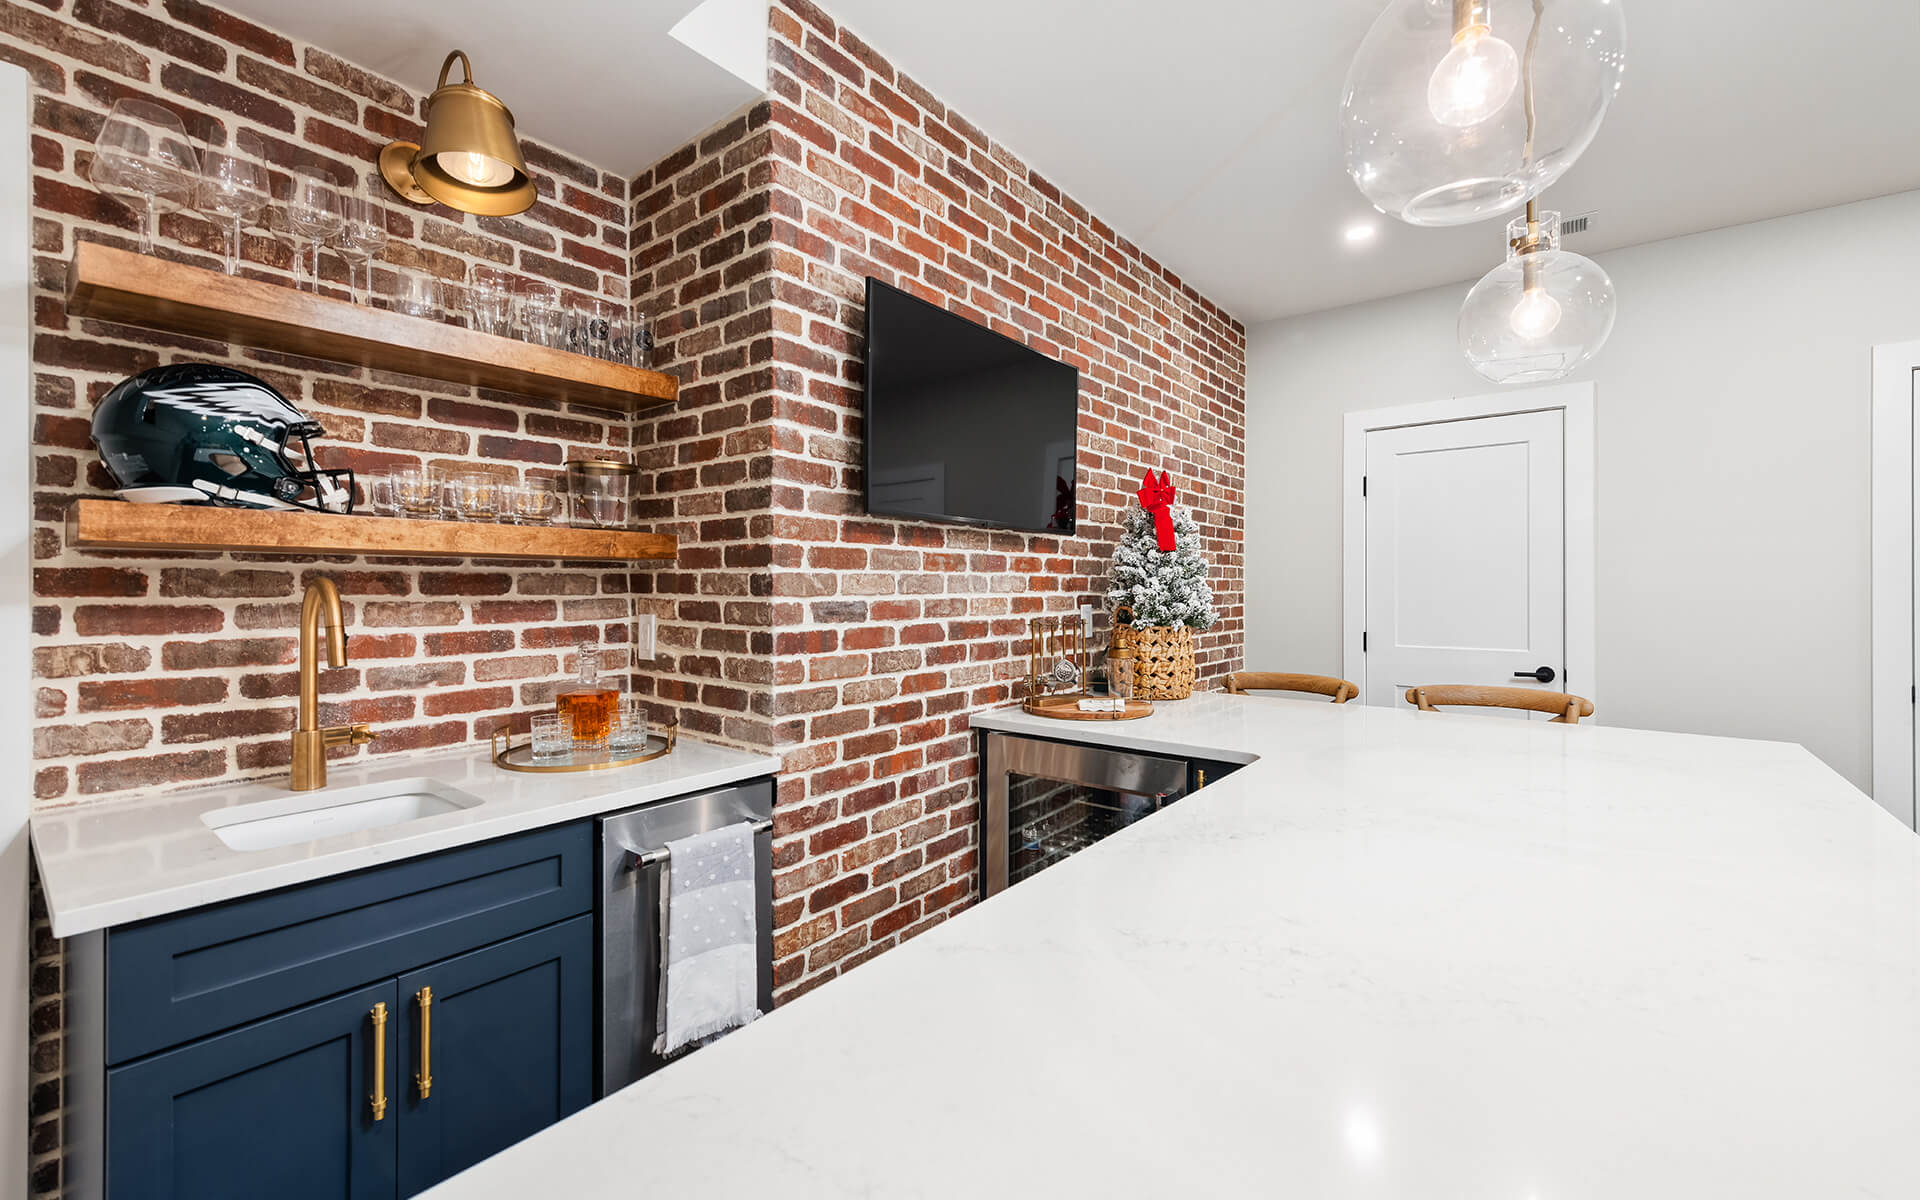 Finished Basement Project - Exposed Brick and Granite Bar